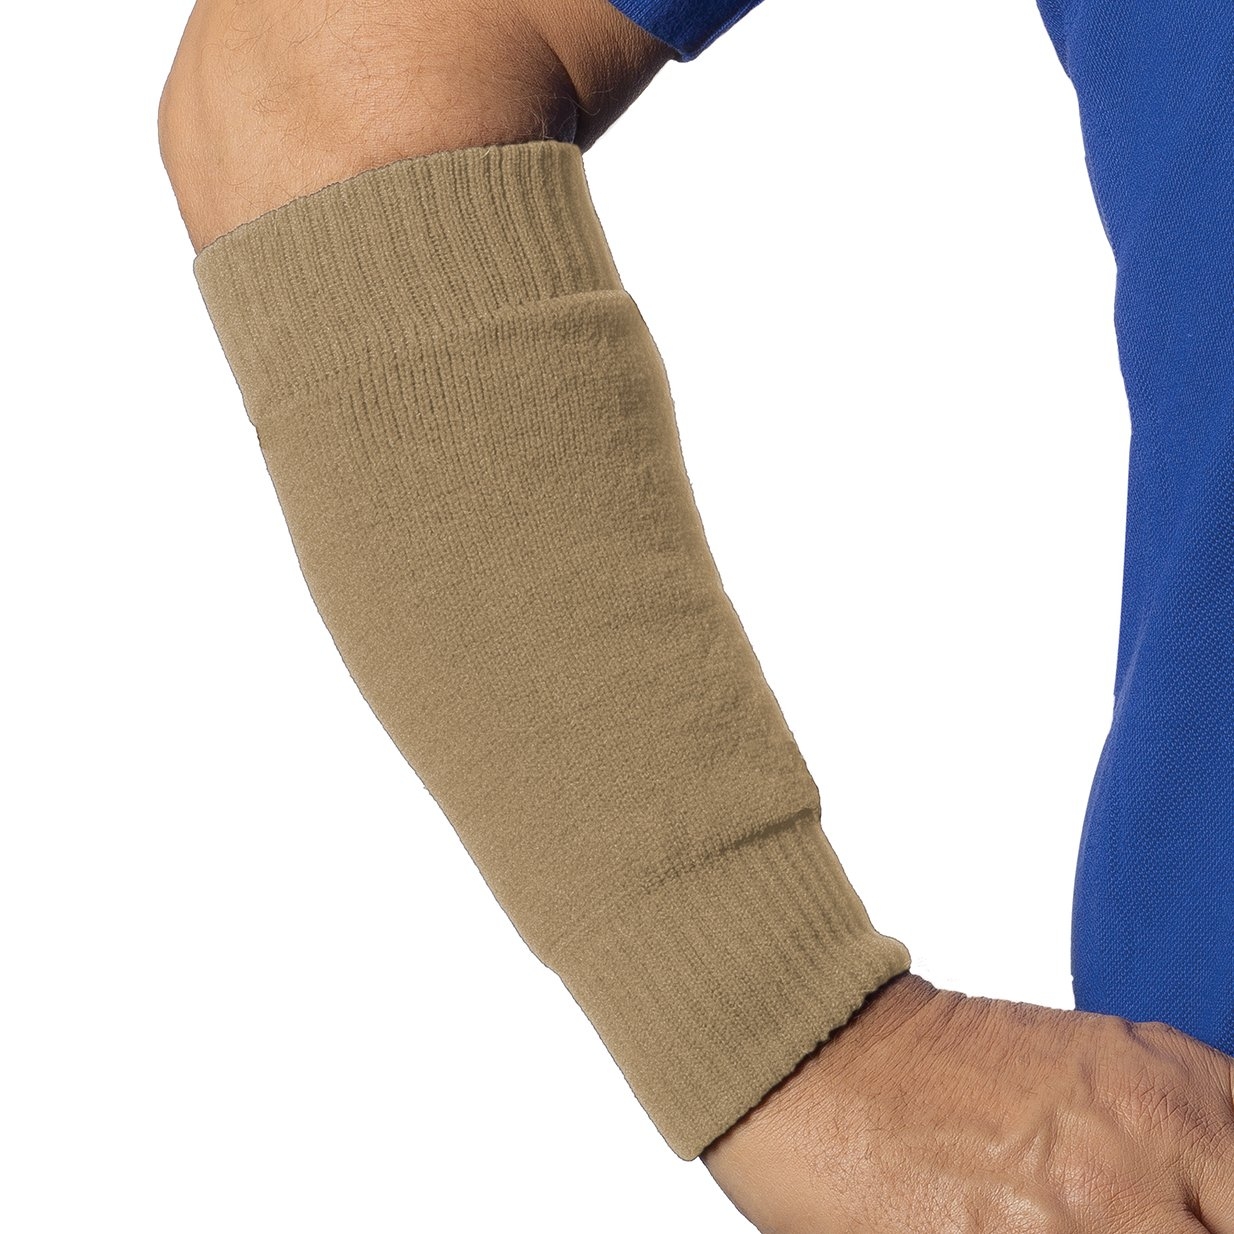 Forearm protectors for thin skin – Light Weight – Protect Frail Skin Khaki – Limb Keepers